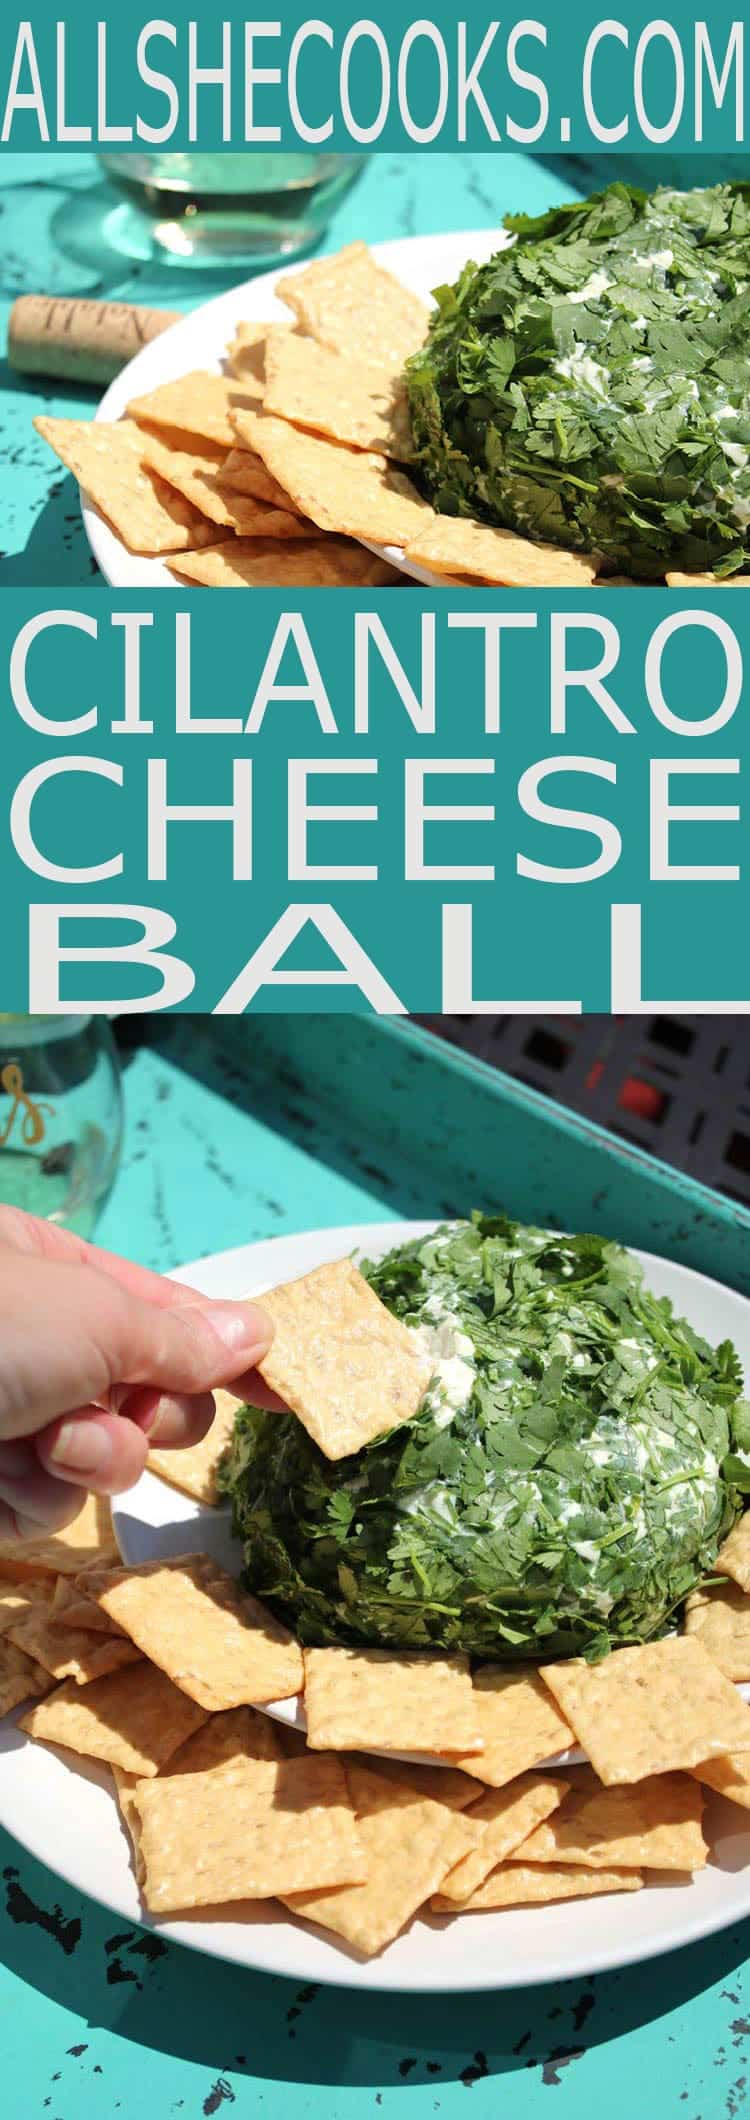 Learn how to make a cheese ball with this easy Cilantro Cheese Ball Recipe. Simple recipe takes just 5 minutes to make from start to finish.